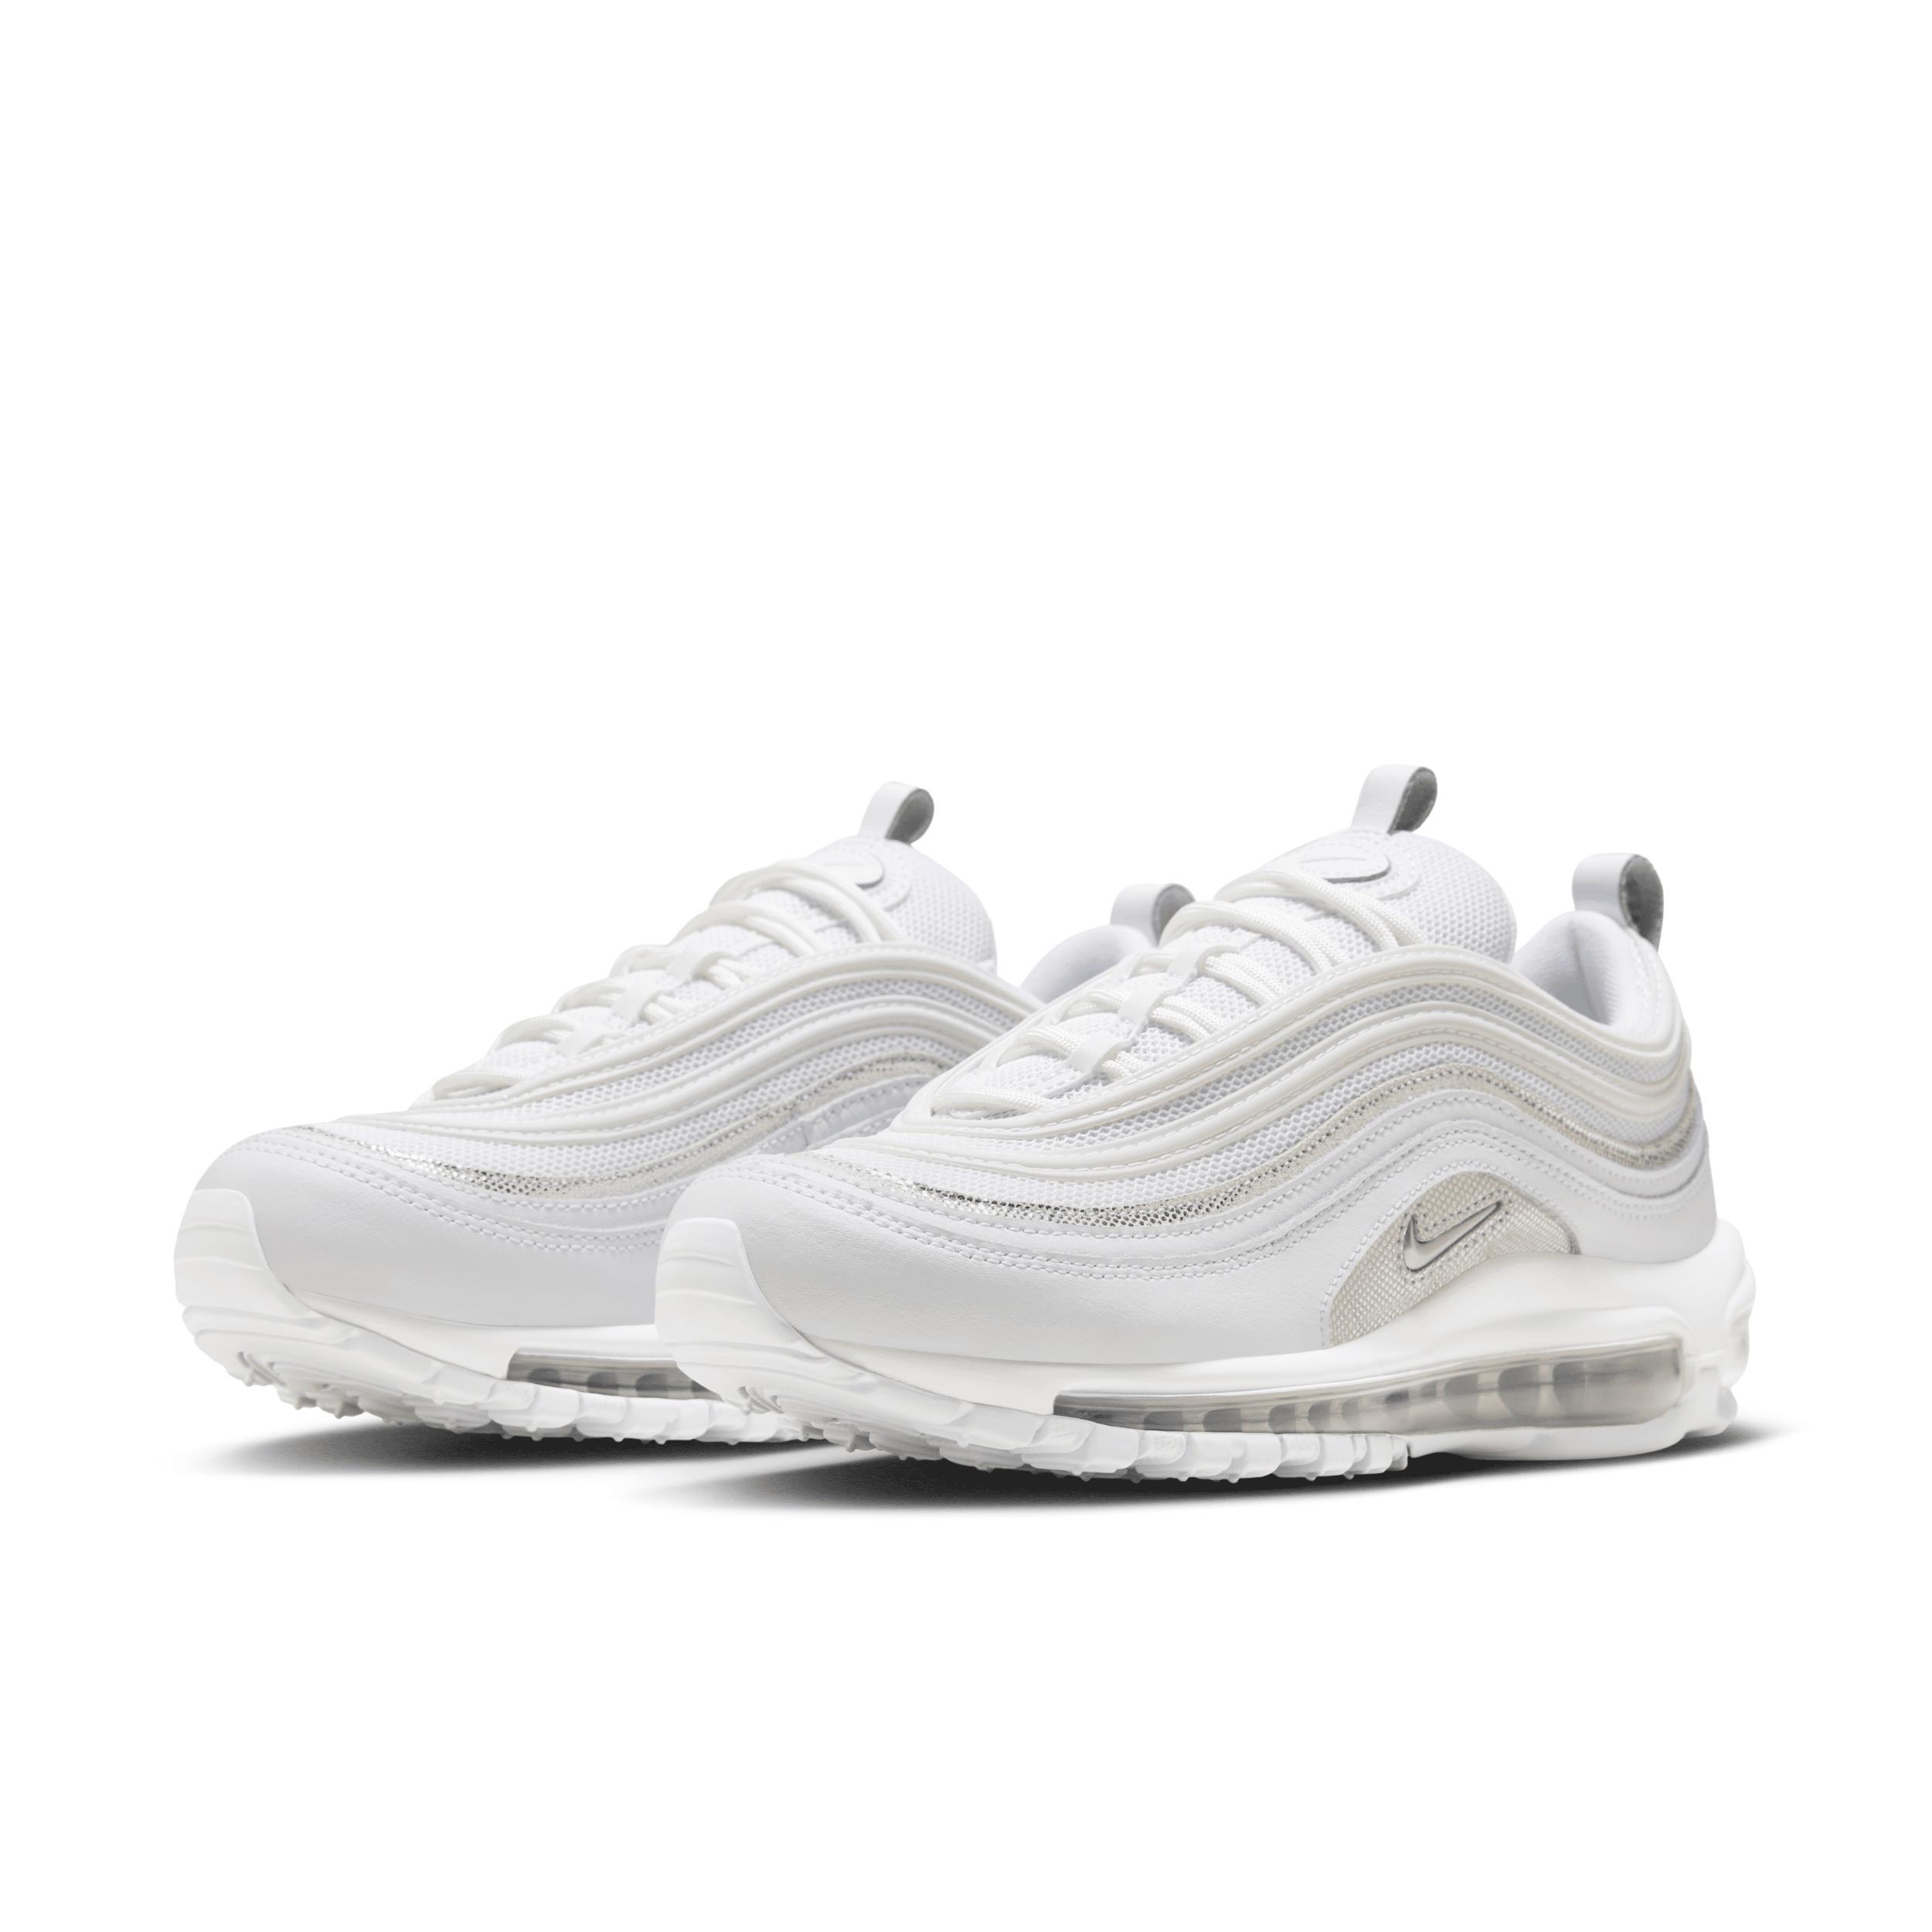 Nike Women's Air Max 97 Shoes Product Image